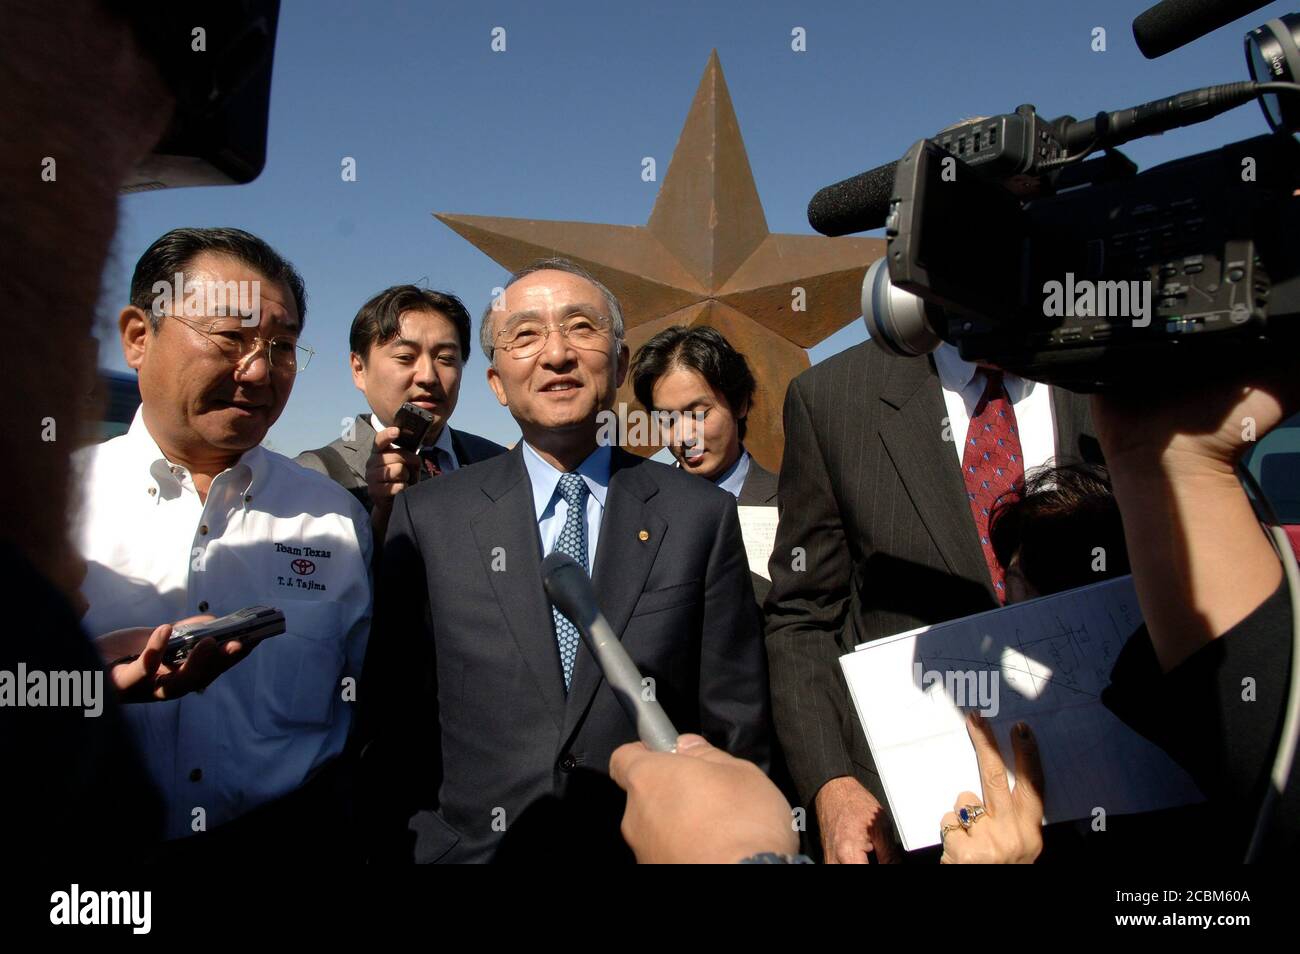 San Antonio, Texas November 17, 2006: Toyota Motor Company CEO  Katsuaki Watanabe speaks to reporters after the first two trucks roll off the assembly line at Toyota Motor Manufacturing's new south Texas assembly plant in Bexar County. The $1.28-billion facility employs about 1,800 workers. ©Bob Daemmrich Stock Photo